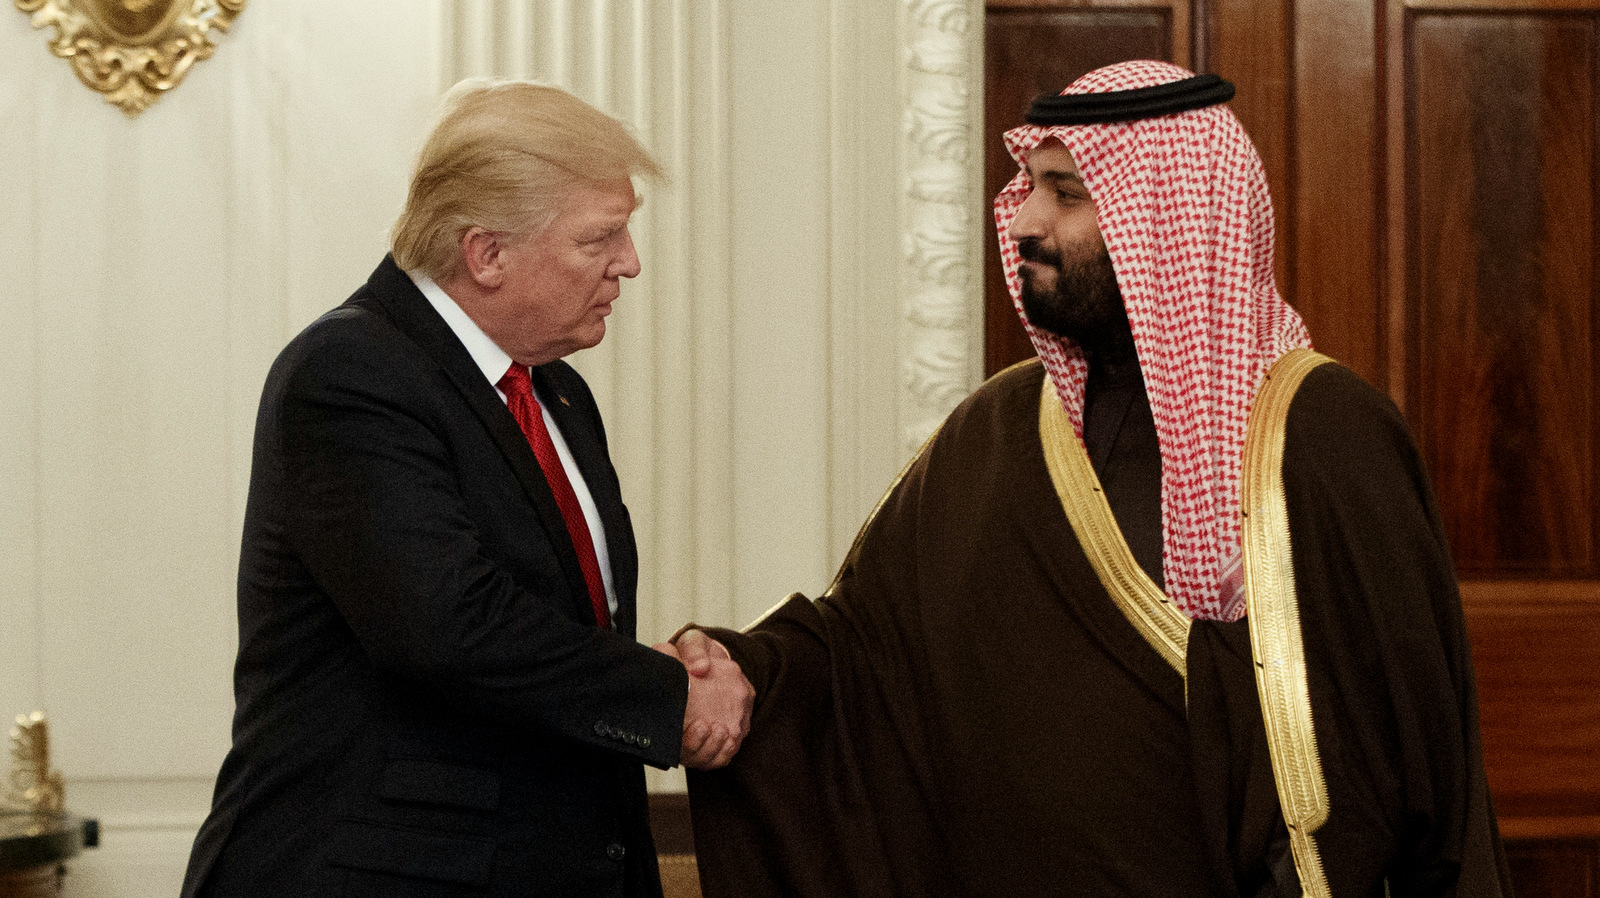 President Donald Trump shakes hands with Saudi Defense Minister and Deputy Crown Prince Mohammed bin Salman, Tuesday, March 14, 2017, in the State Dining Room of the White House in Washington. (AP/Evan Vucci)